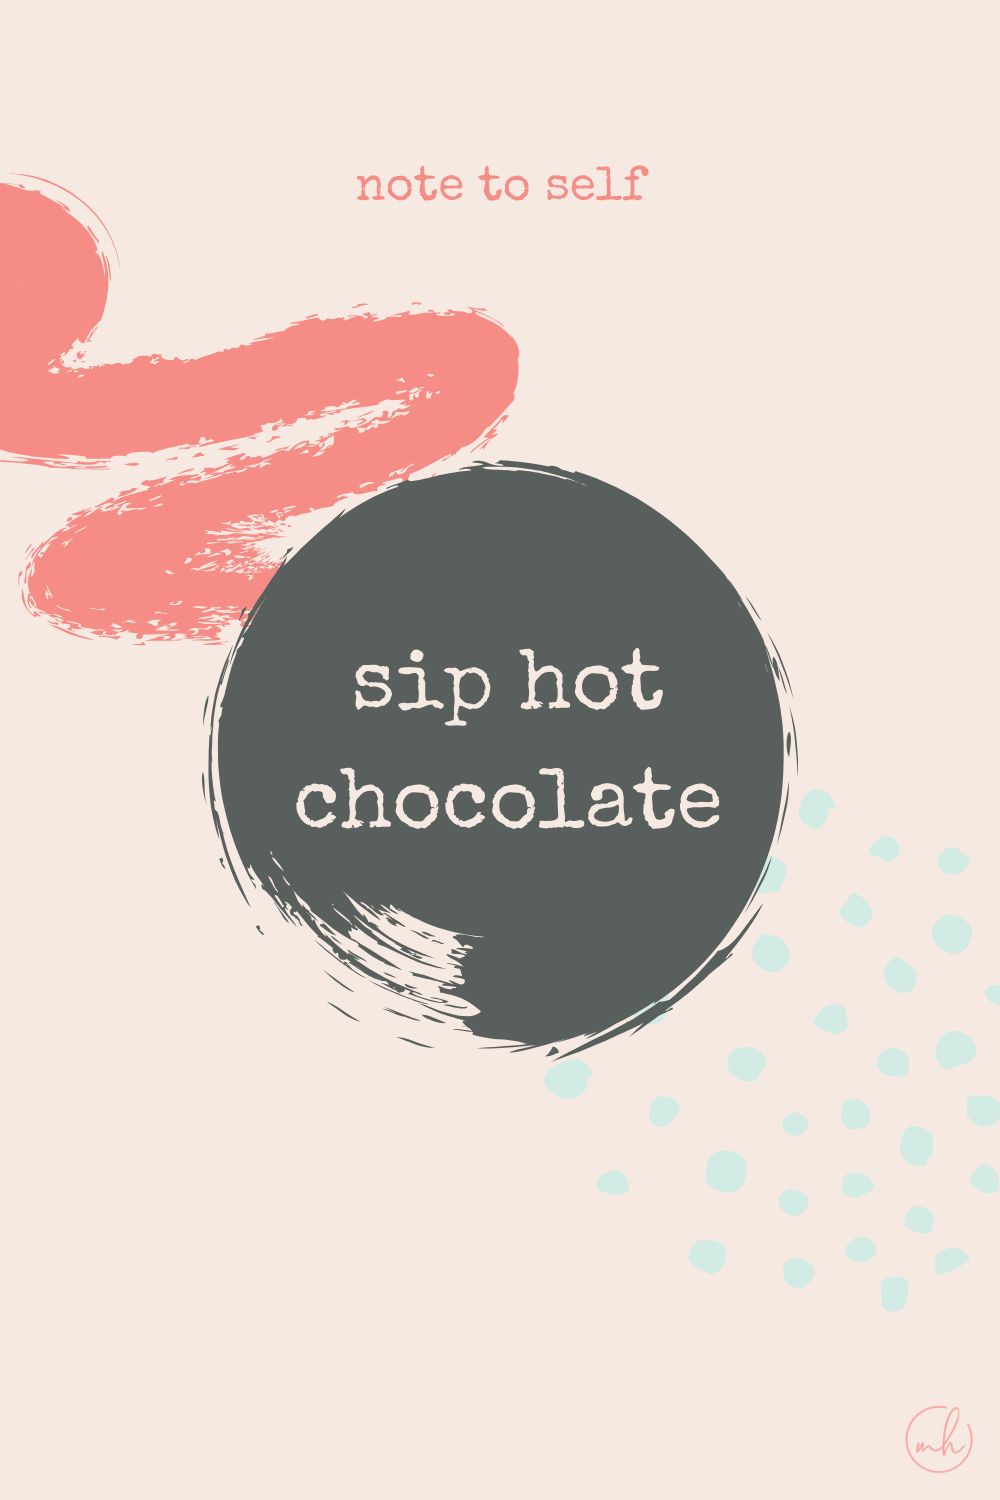 Sip hot chocolate - Note to self quotes | myhoogah